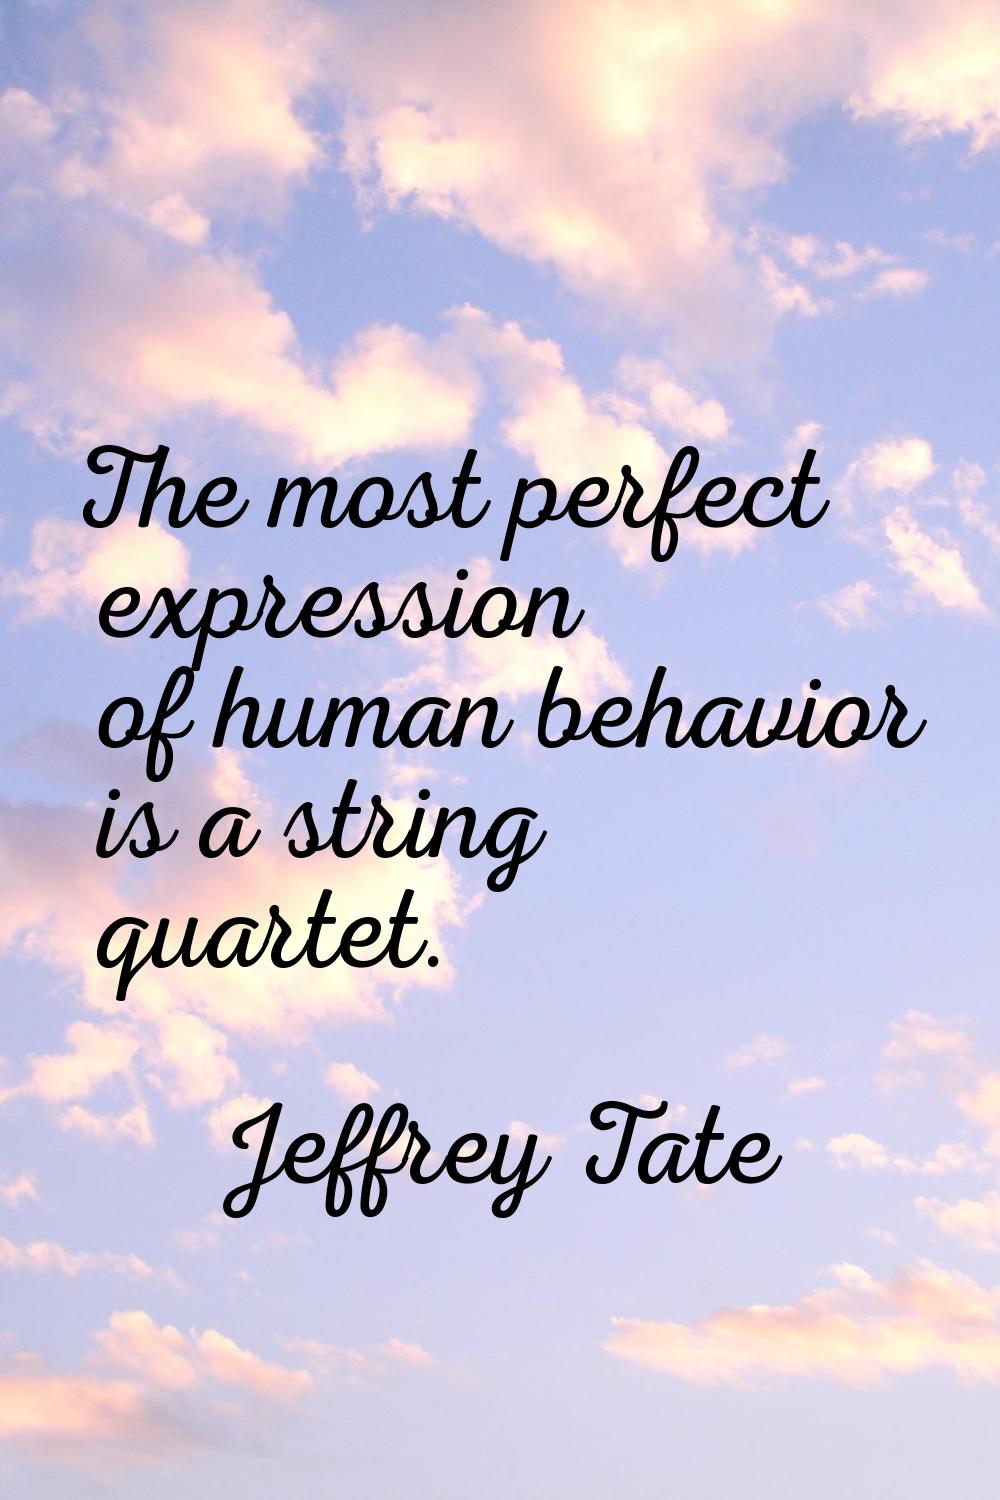 The most perfect expression of human behavior is a string quartet.